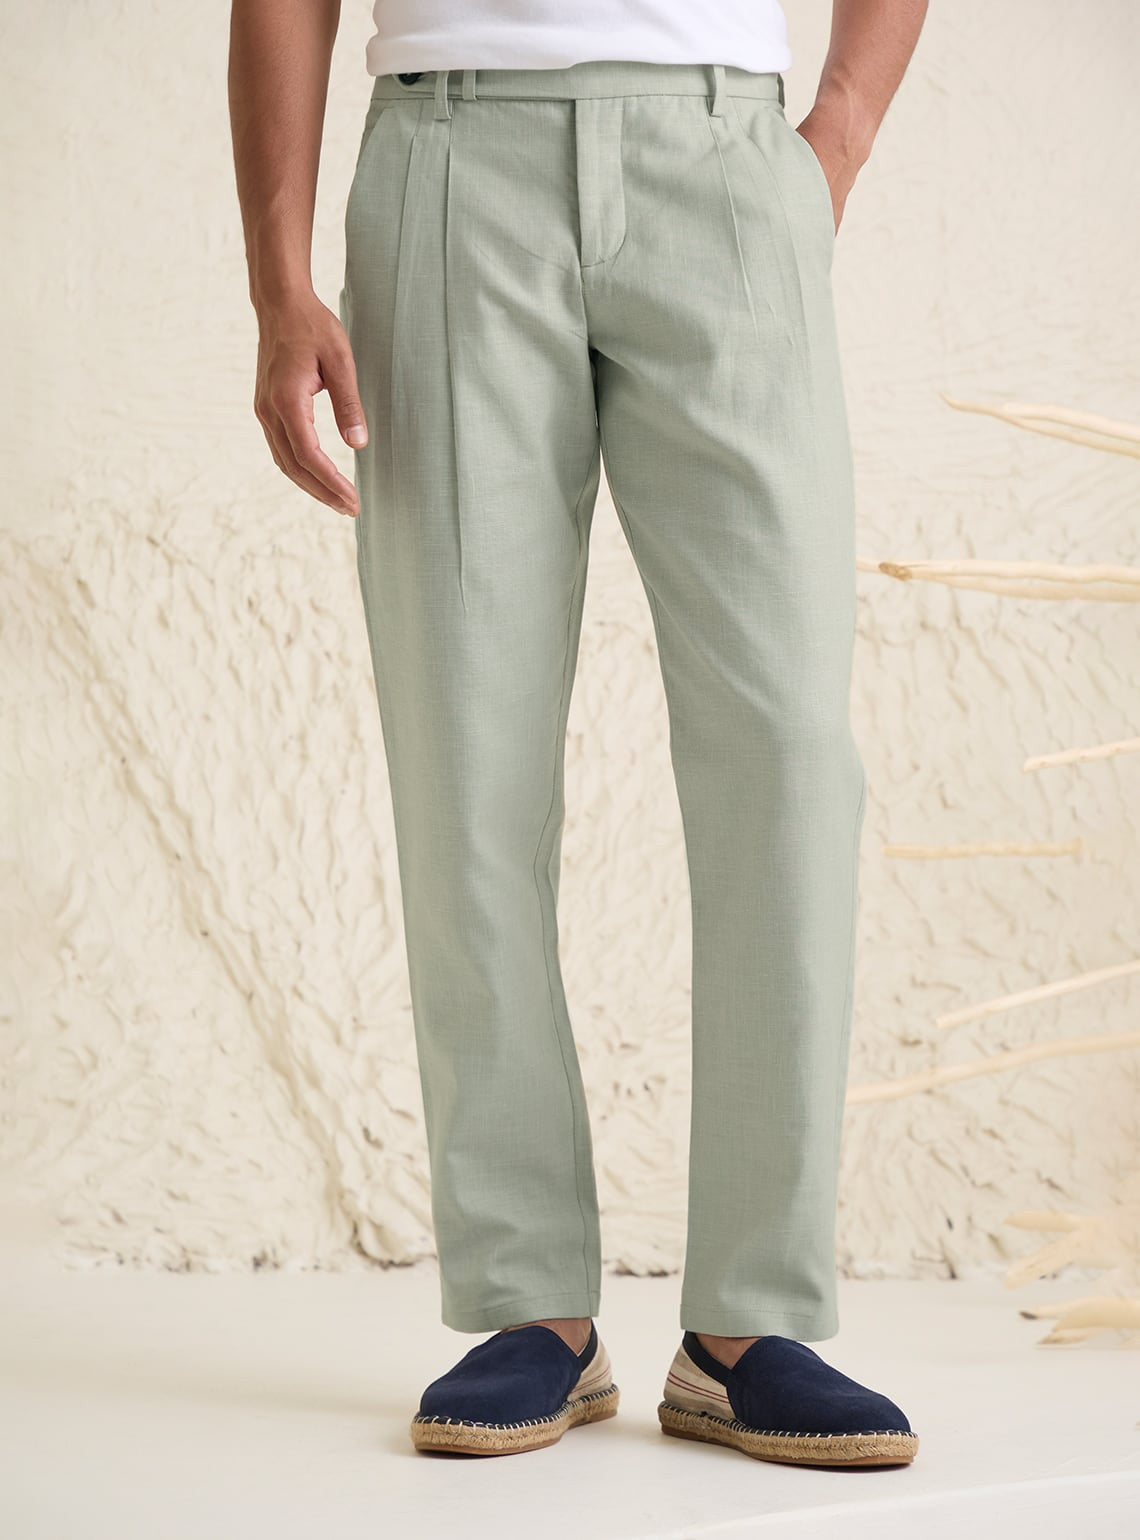 Buy Mens Linen Pants TRUCKEE in White  Mens Trousers  Online in India   Etsy